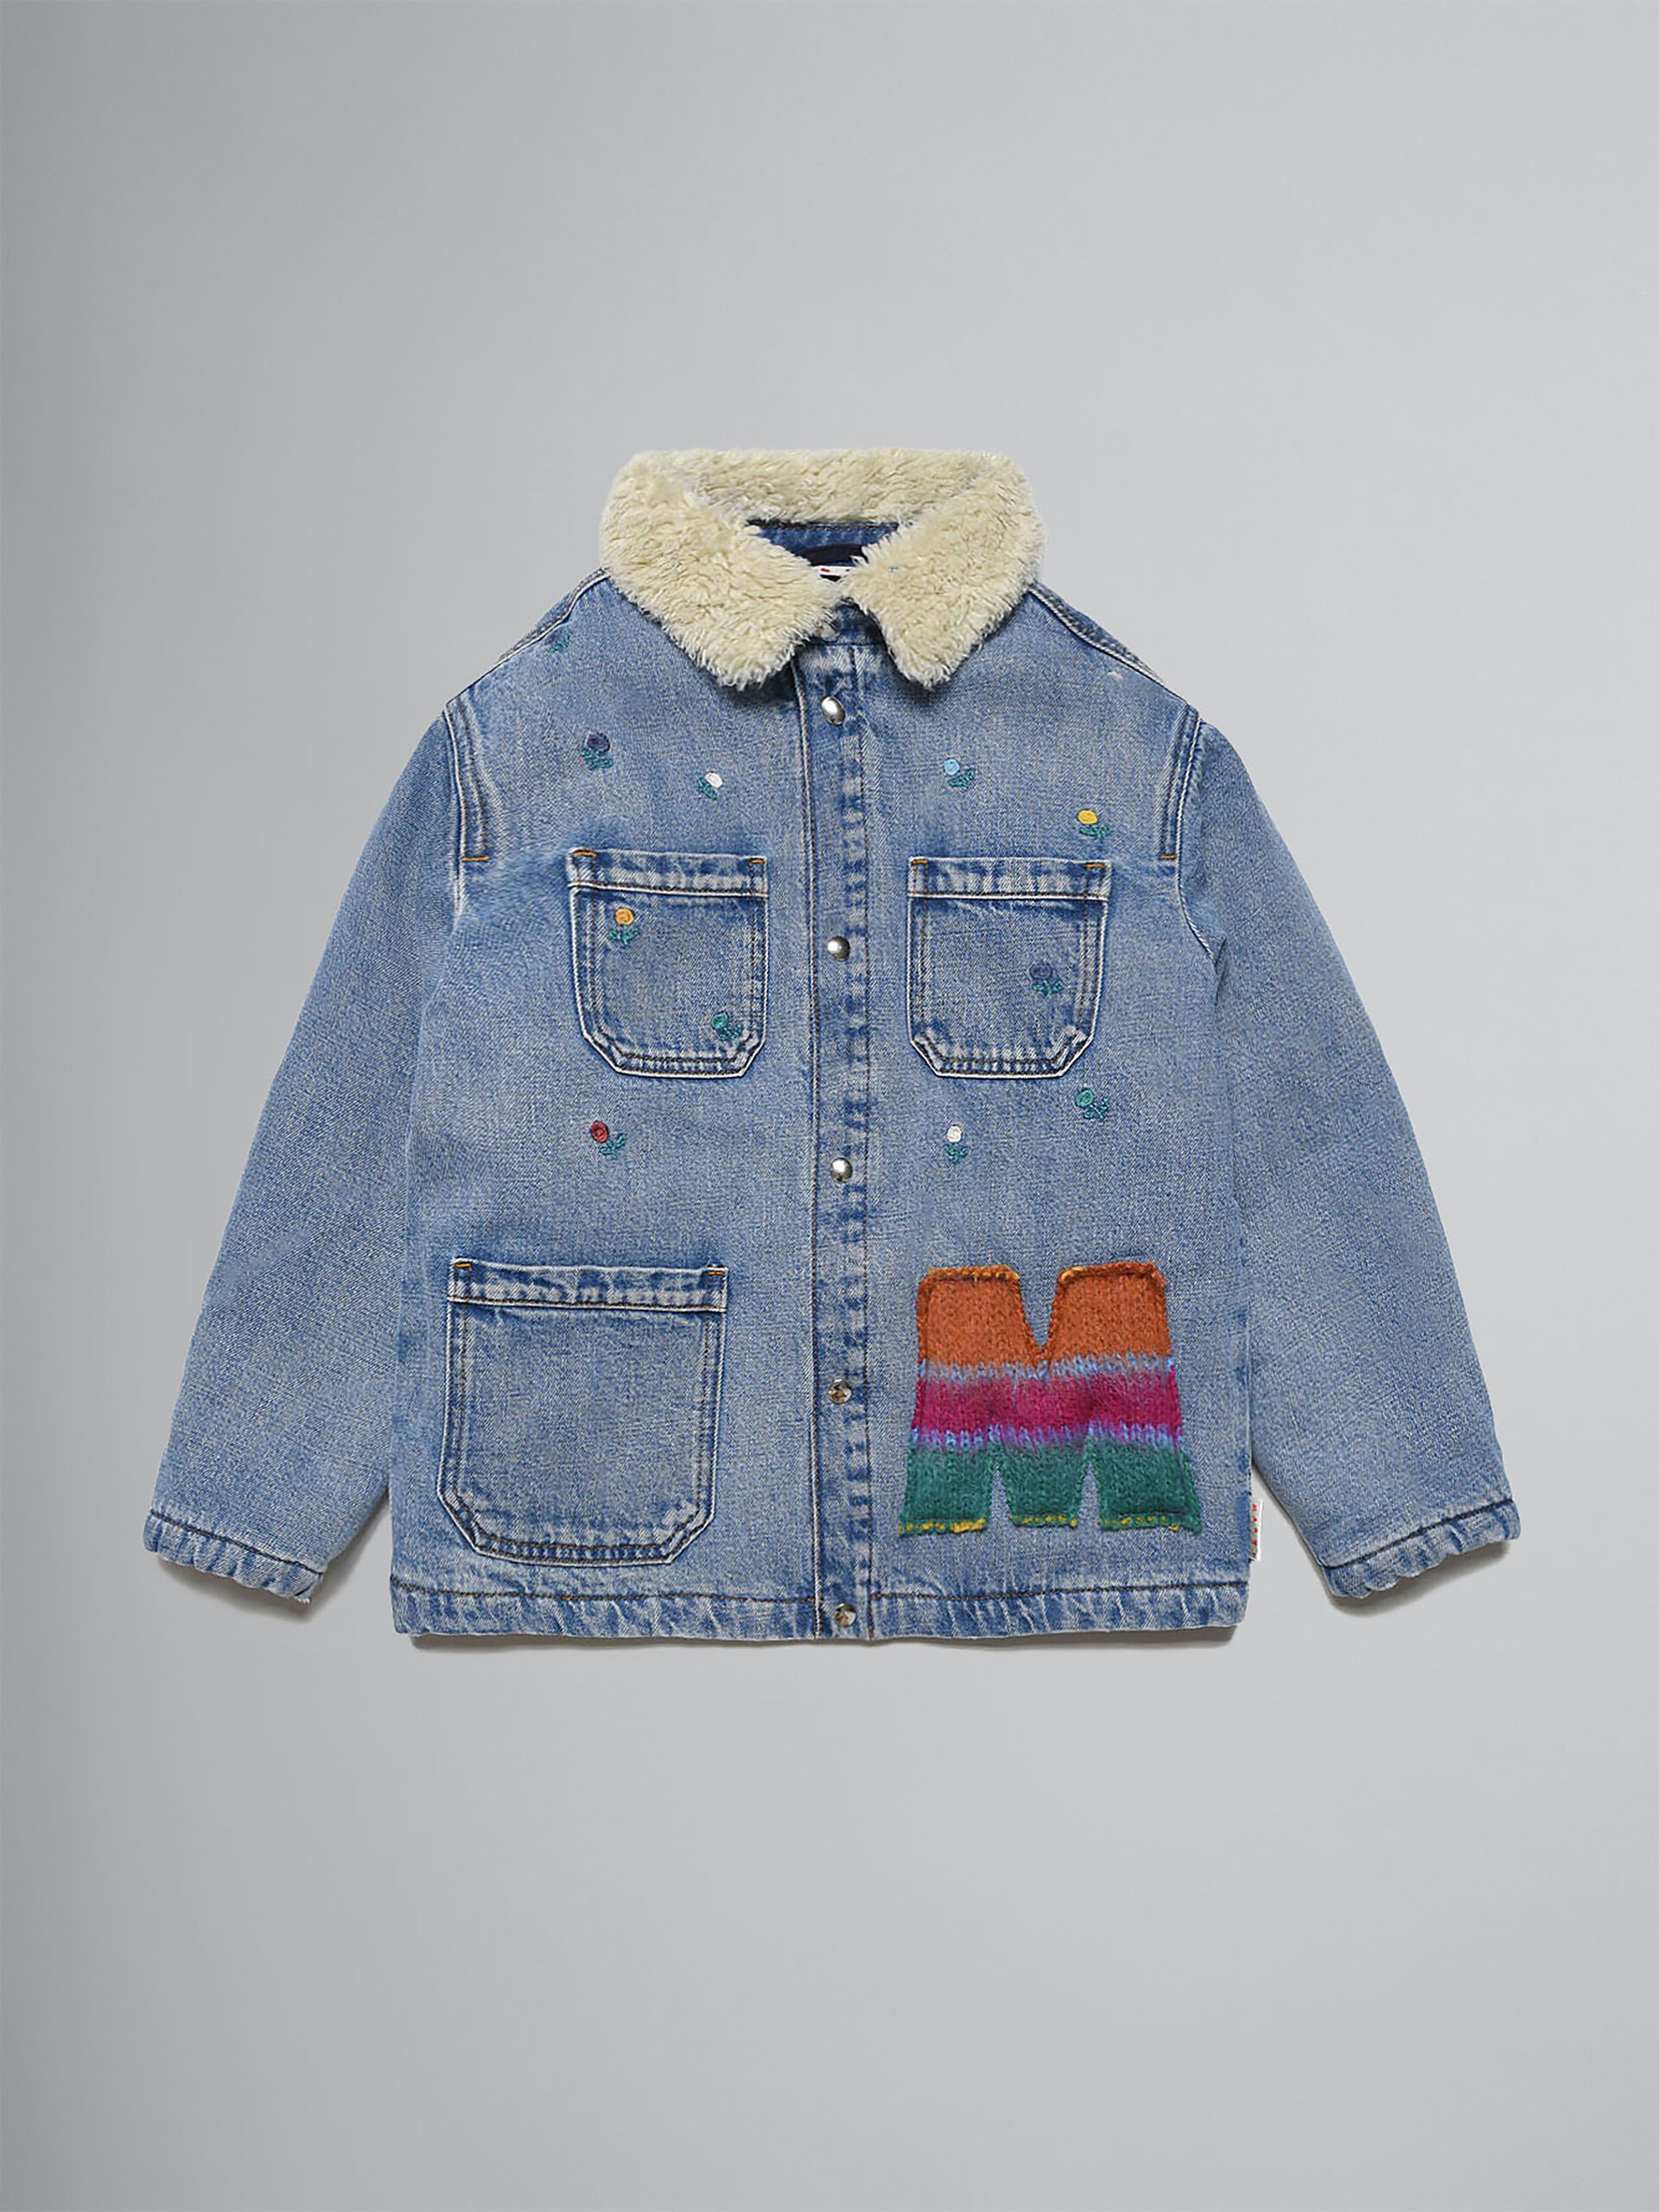 Light denim jacket with floral embroidery and patches - Jackets - Image 1